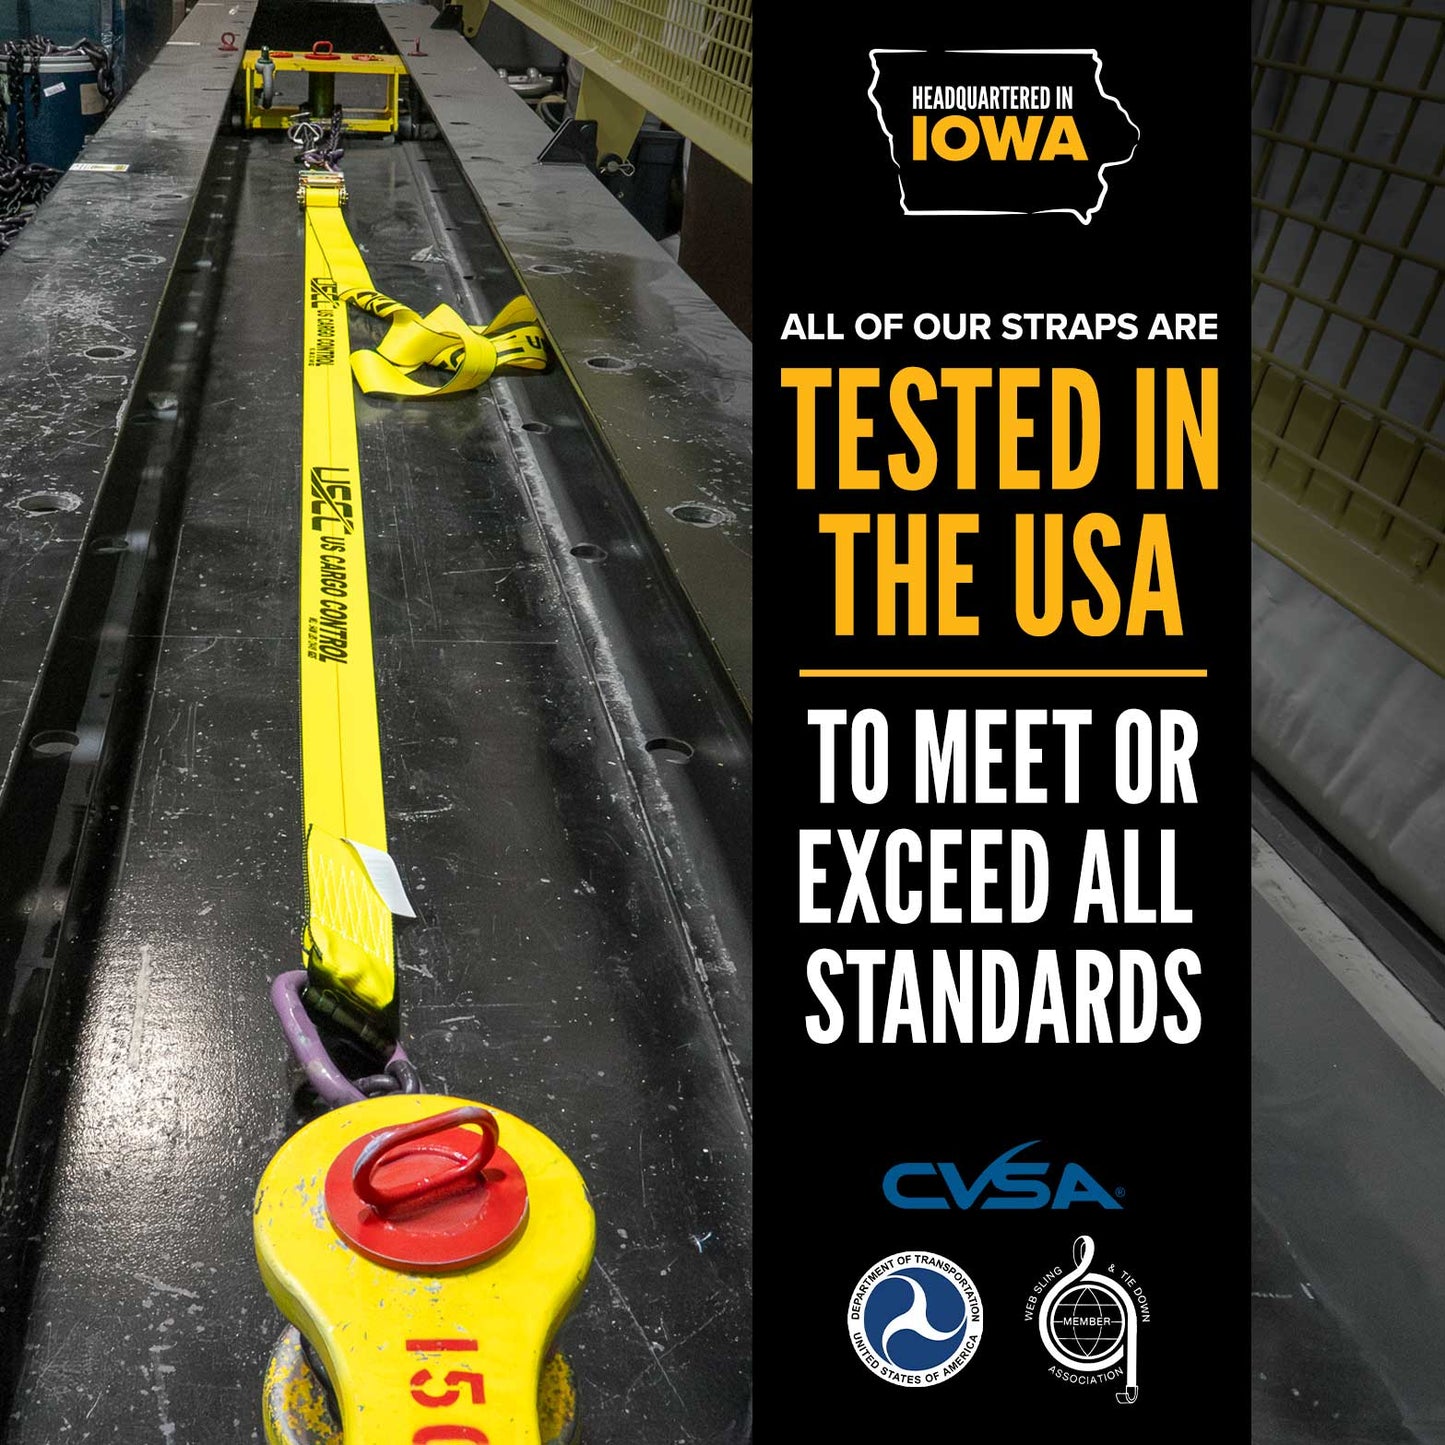 20' heavy duty ratchet straps tested in the USA